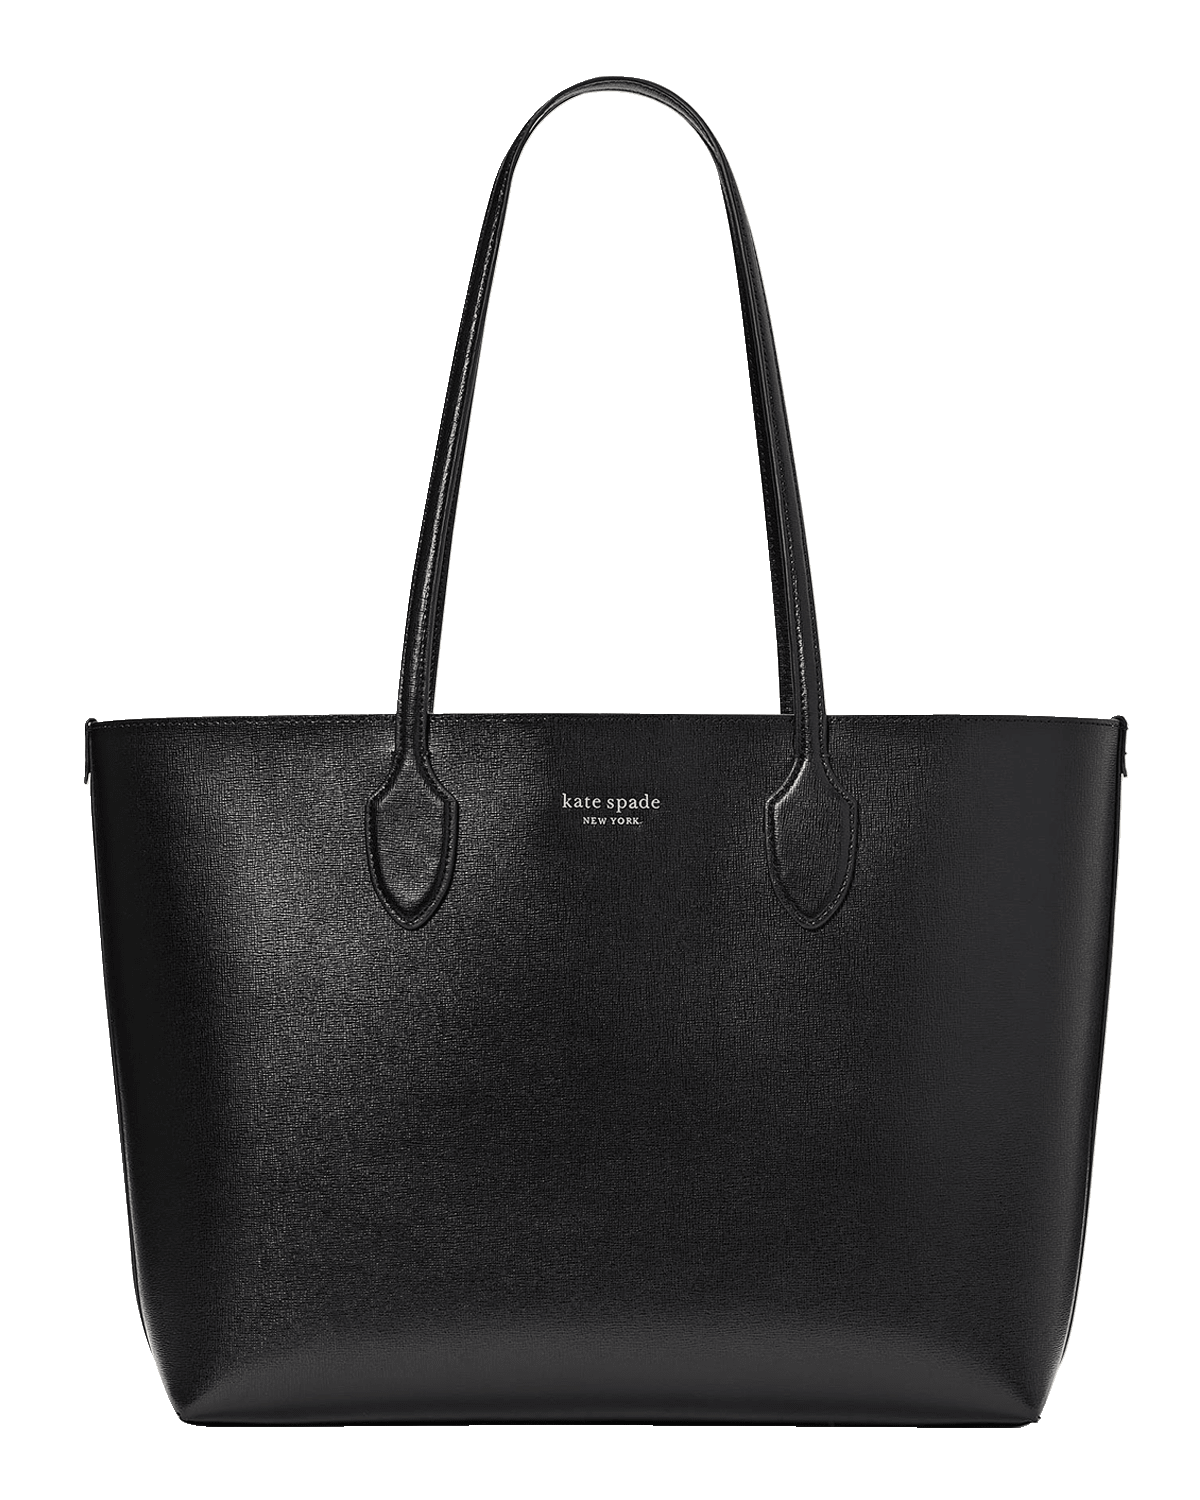 Kate Spade New York All Day Large Tote Bag